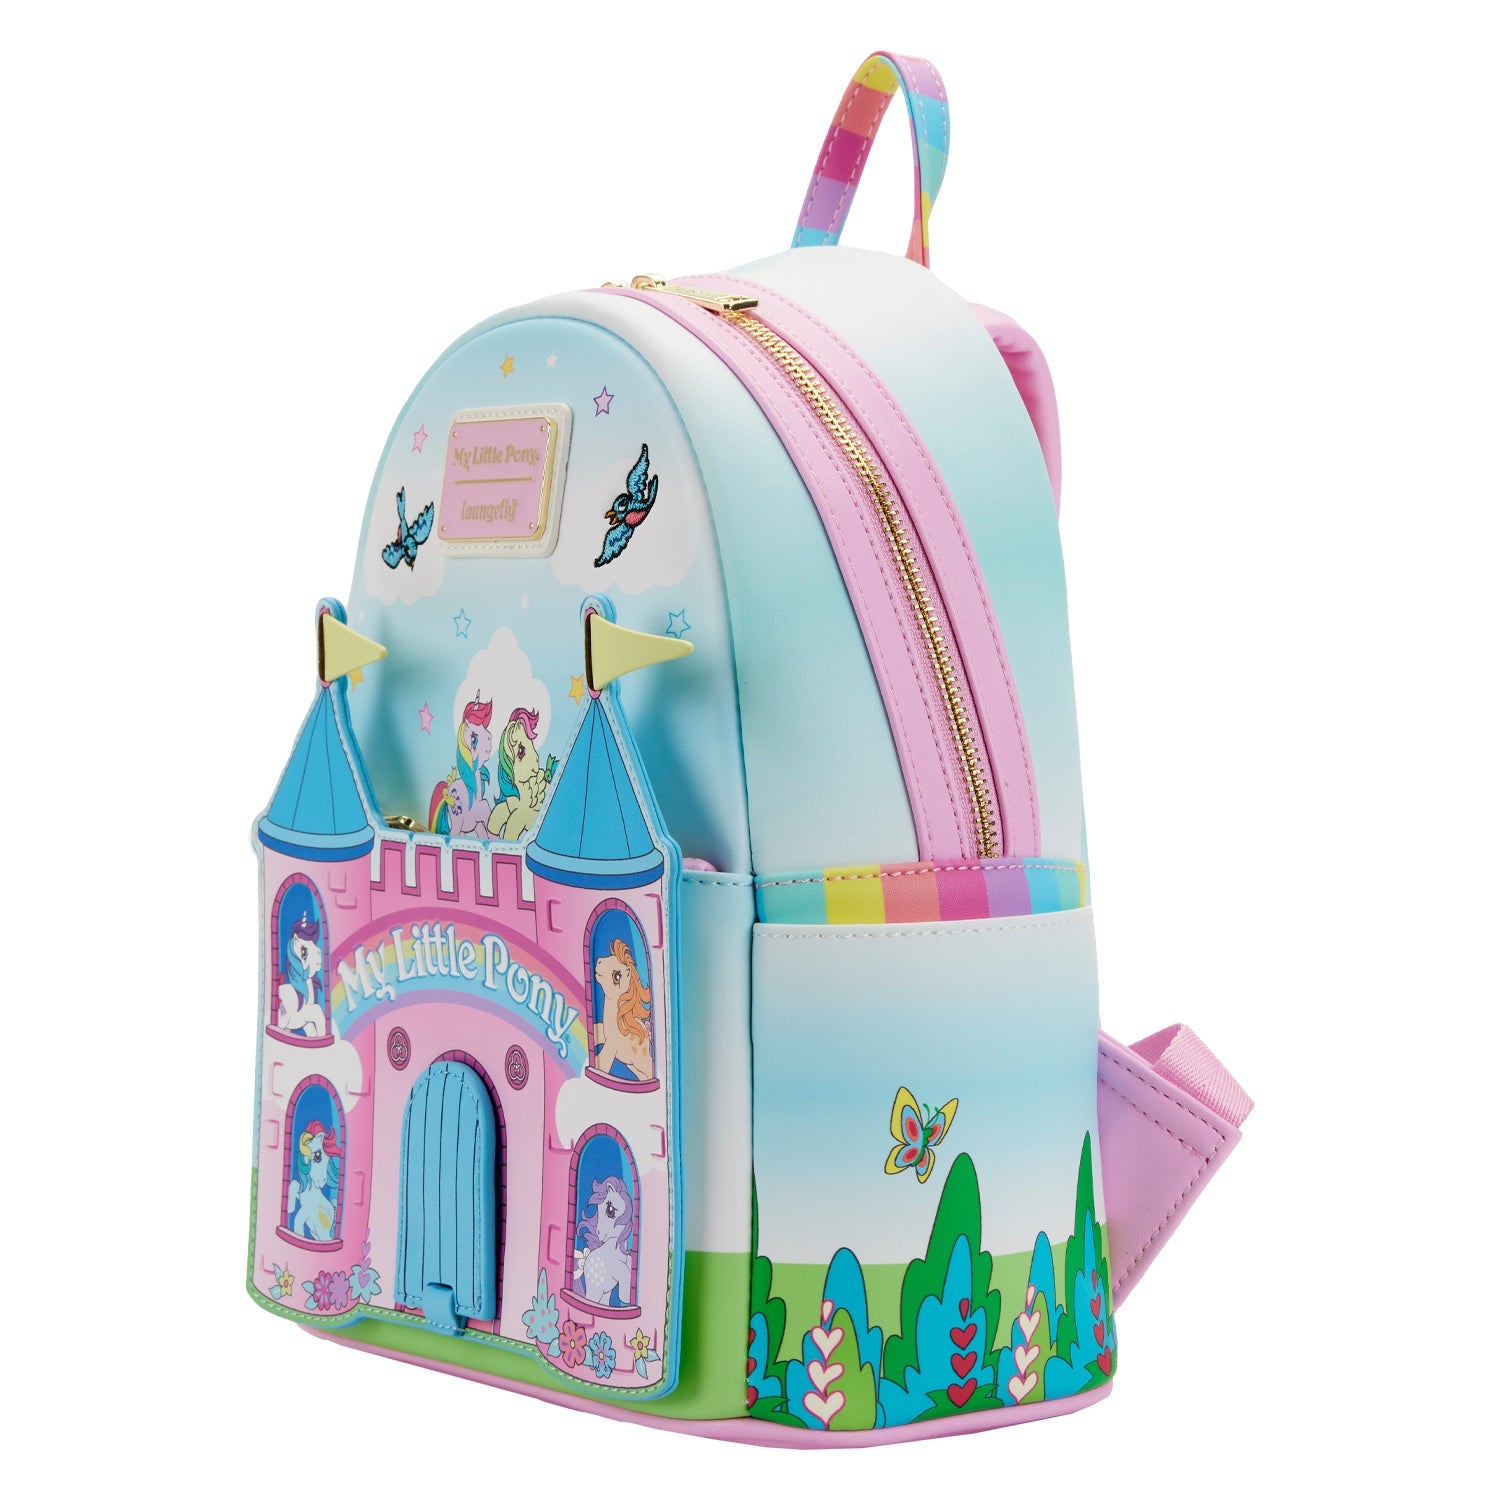 Loungefly My Little Pony Castle Mini Backpack